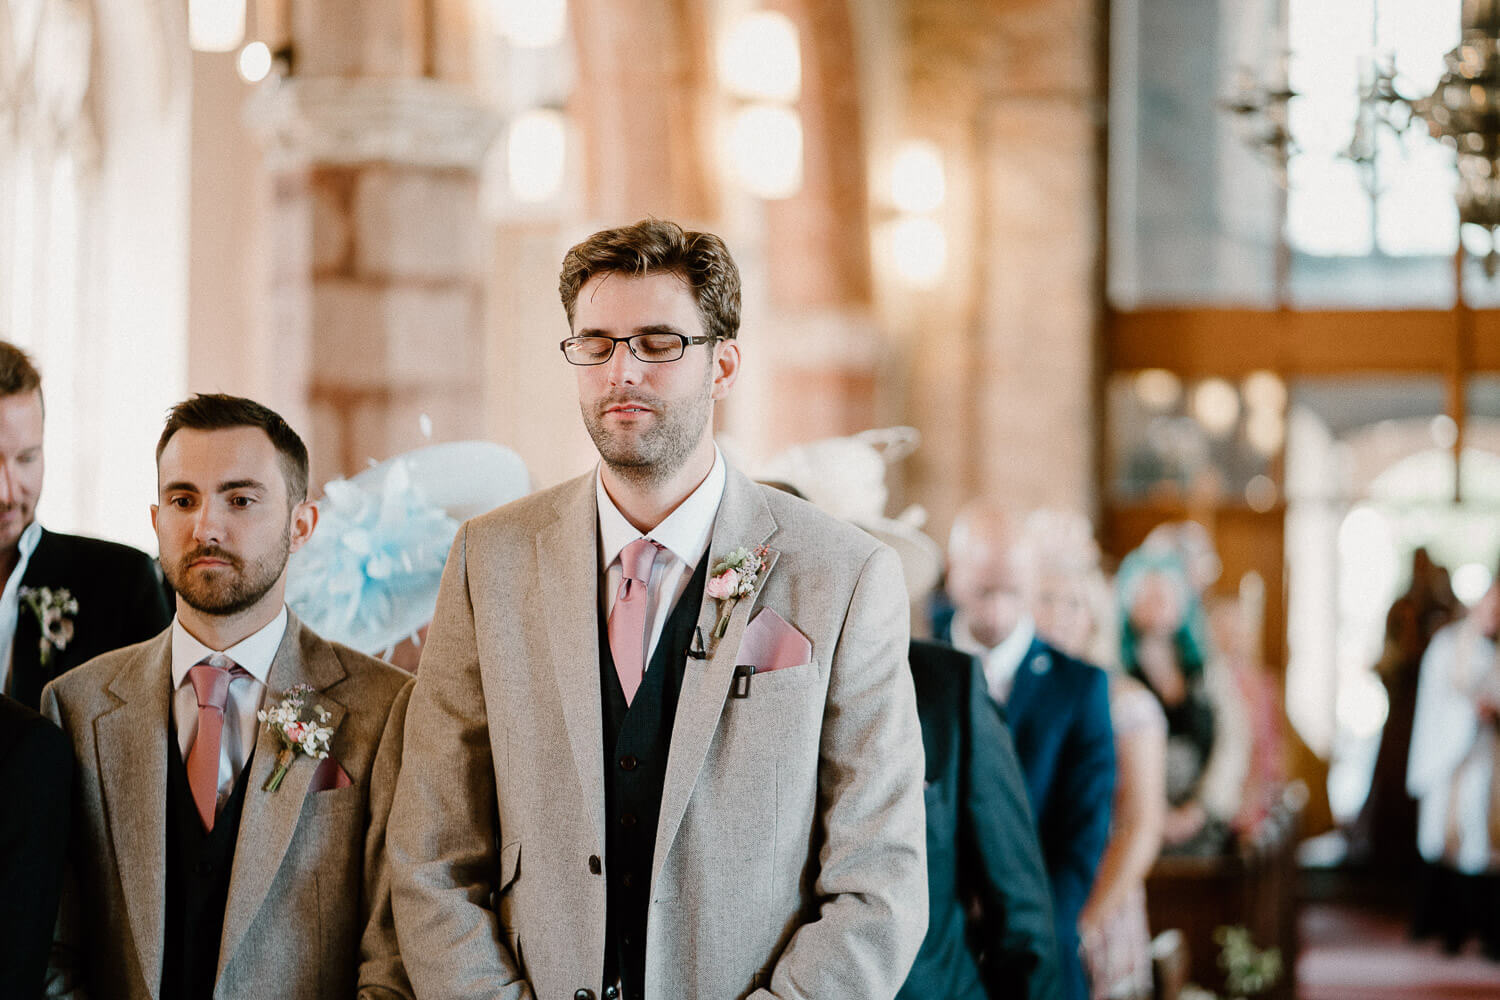 Groom nervously awaits his bride at St Andrew's Church in Ipplepen, Devon.